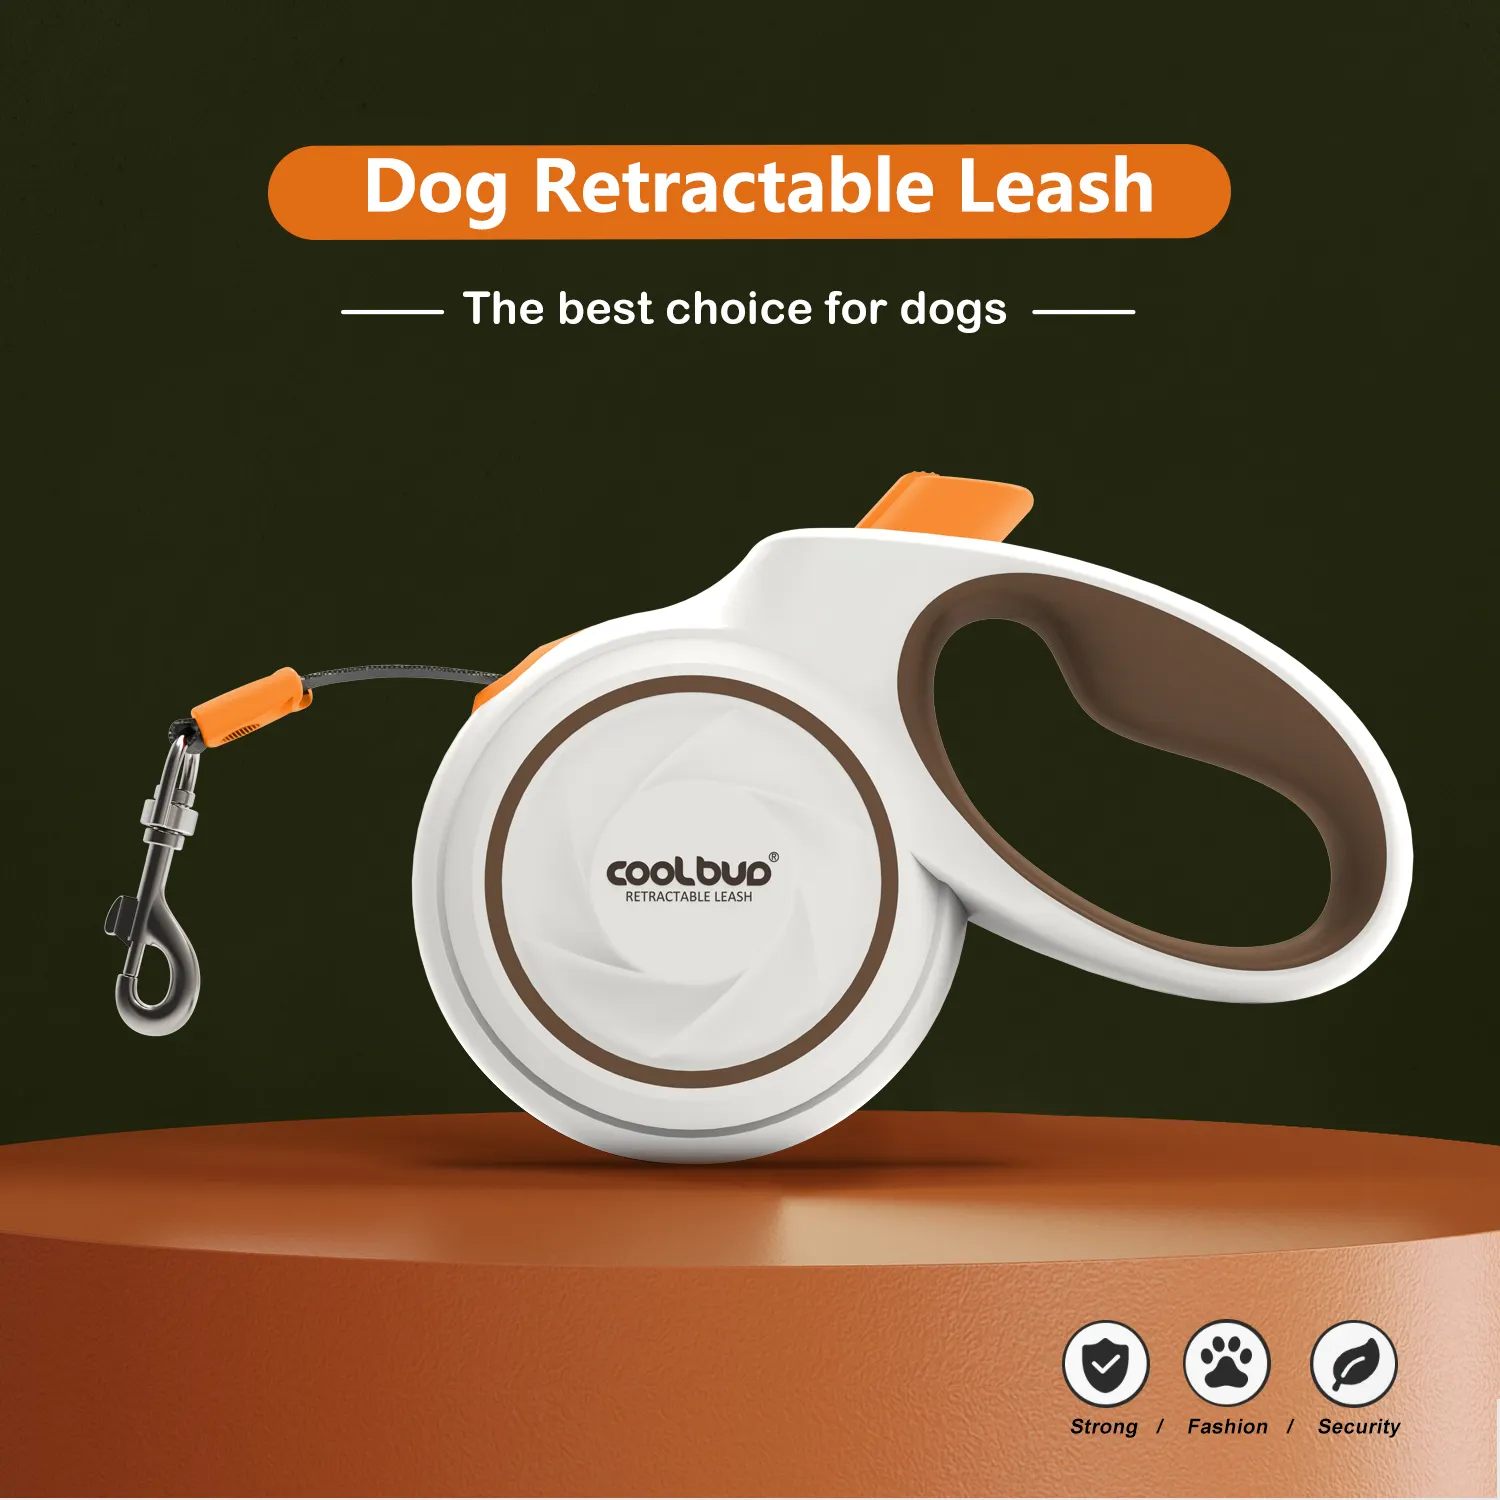 Coolbud 10ft/16ft Strong Nylon Tape Dog Retractable Leash for Large Medium Small Breeds